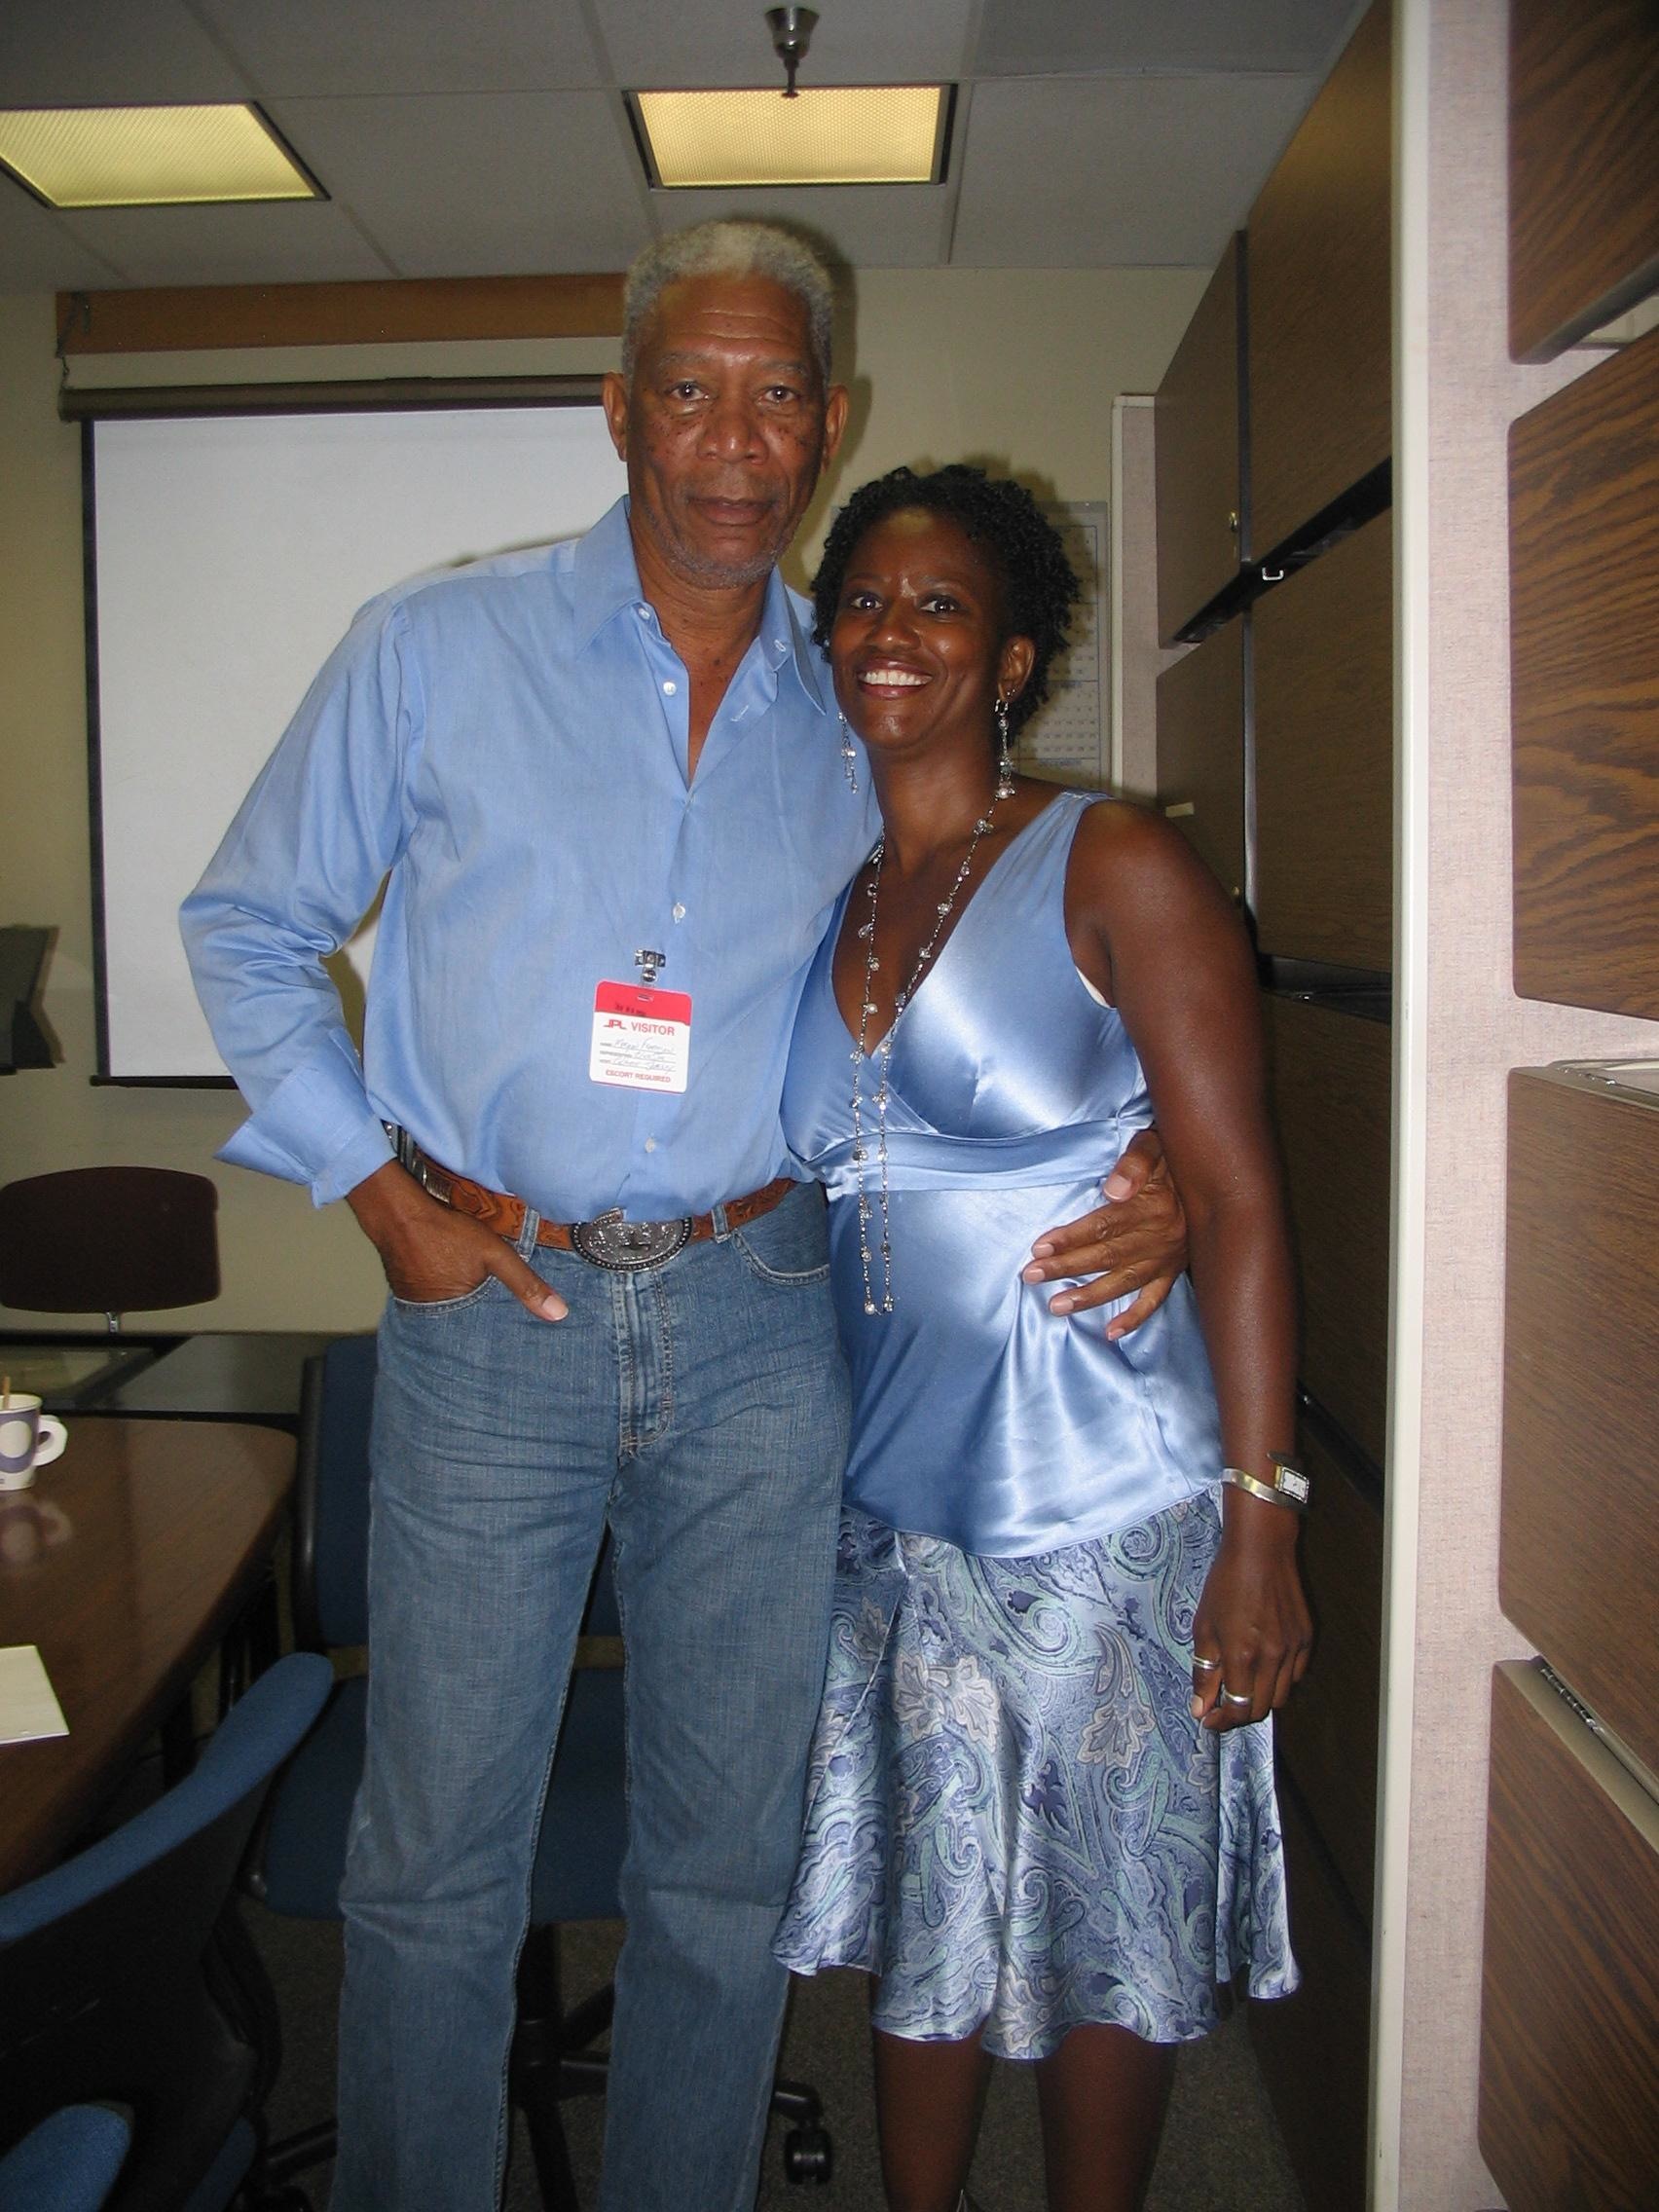 Cozette Parker and Morgan Freeman standing side by side in a room at JPL, Cozette with a big smile on her face, Morgan Freeman looking cool and calm. Both are matching in blue clothes. 